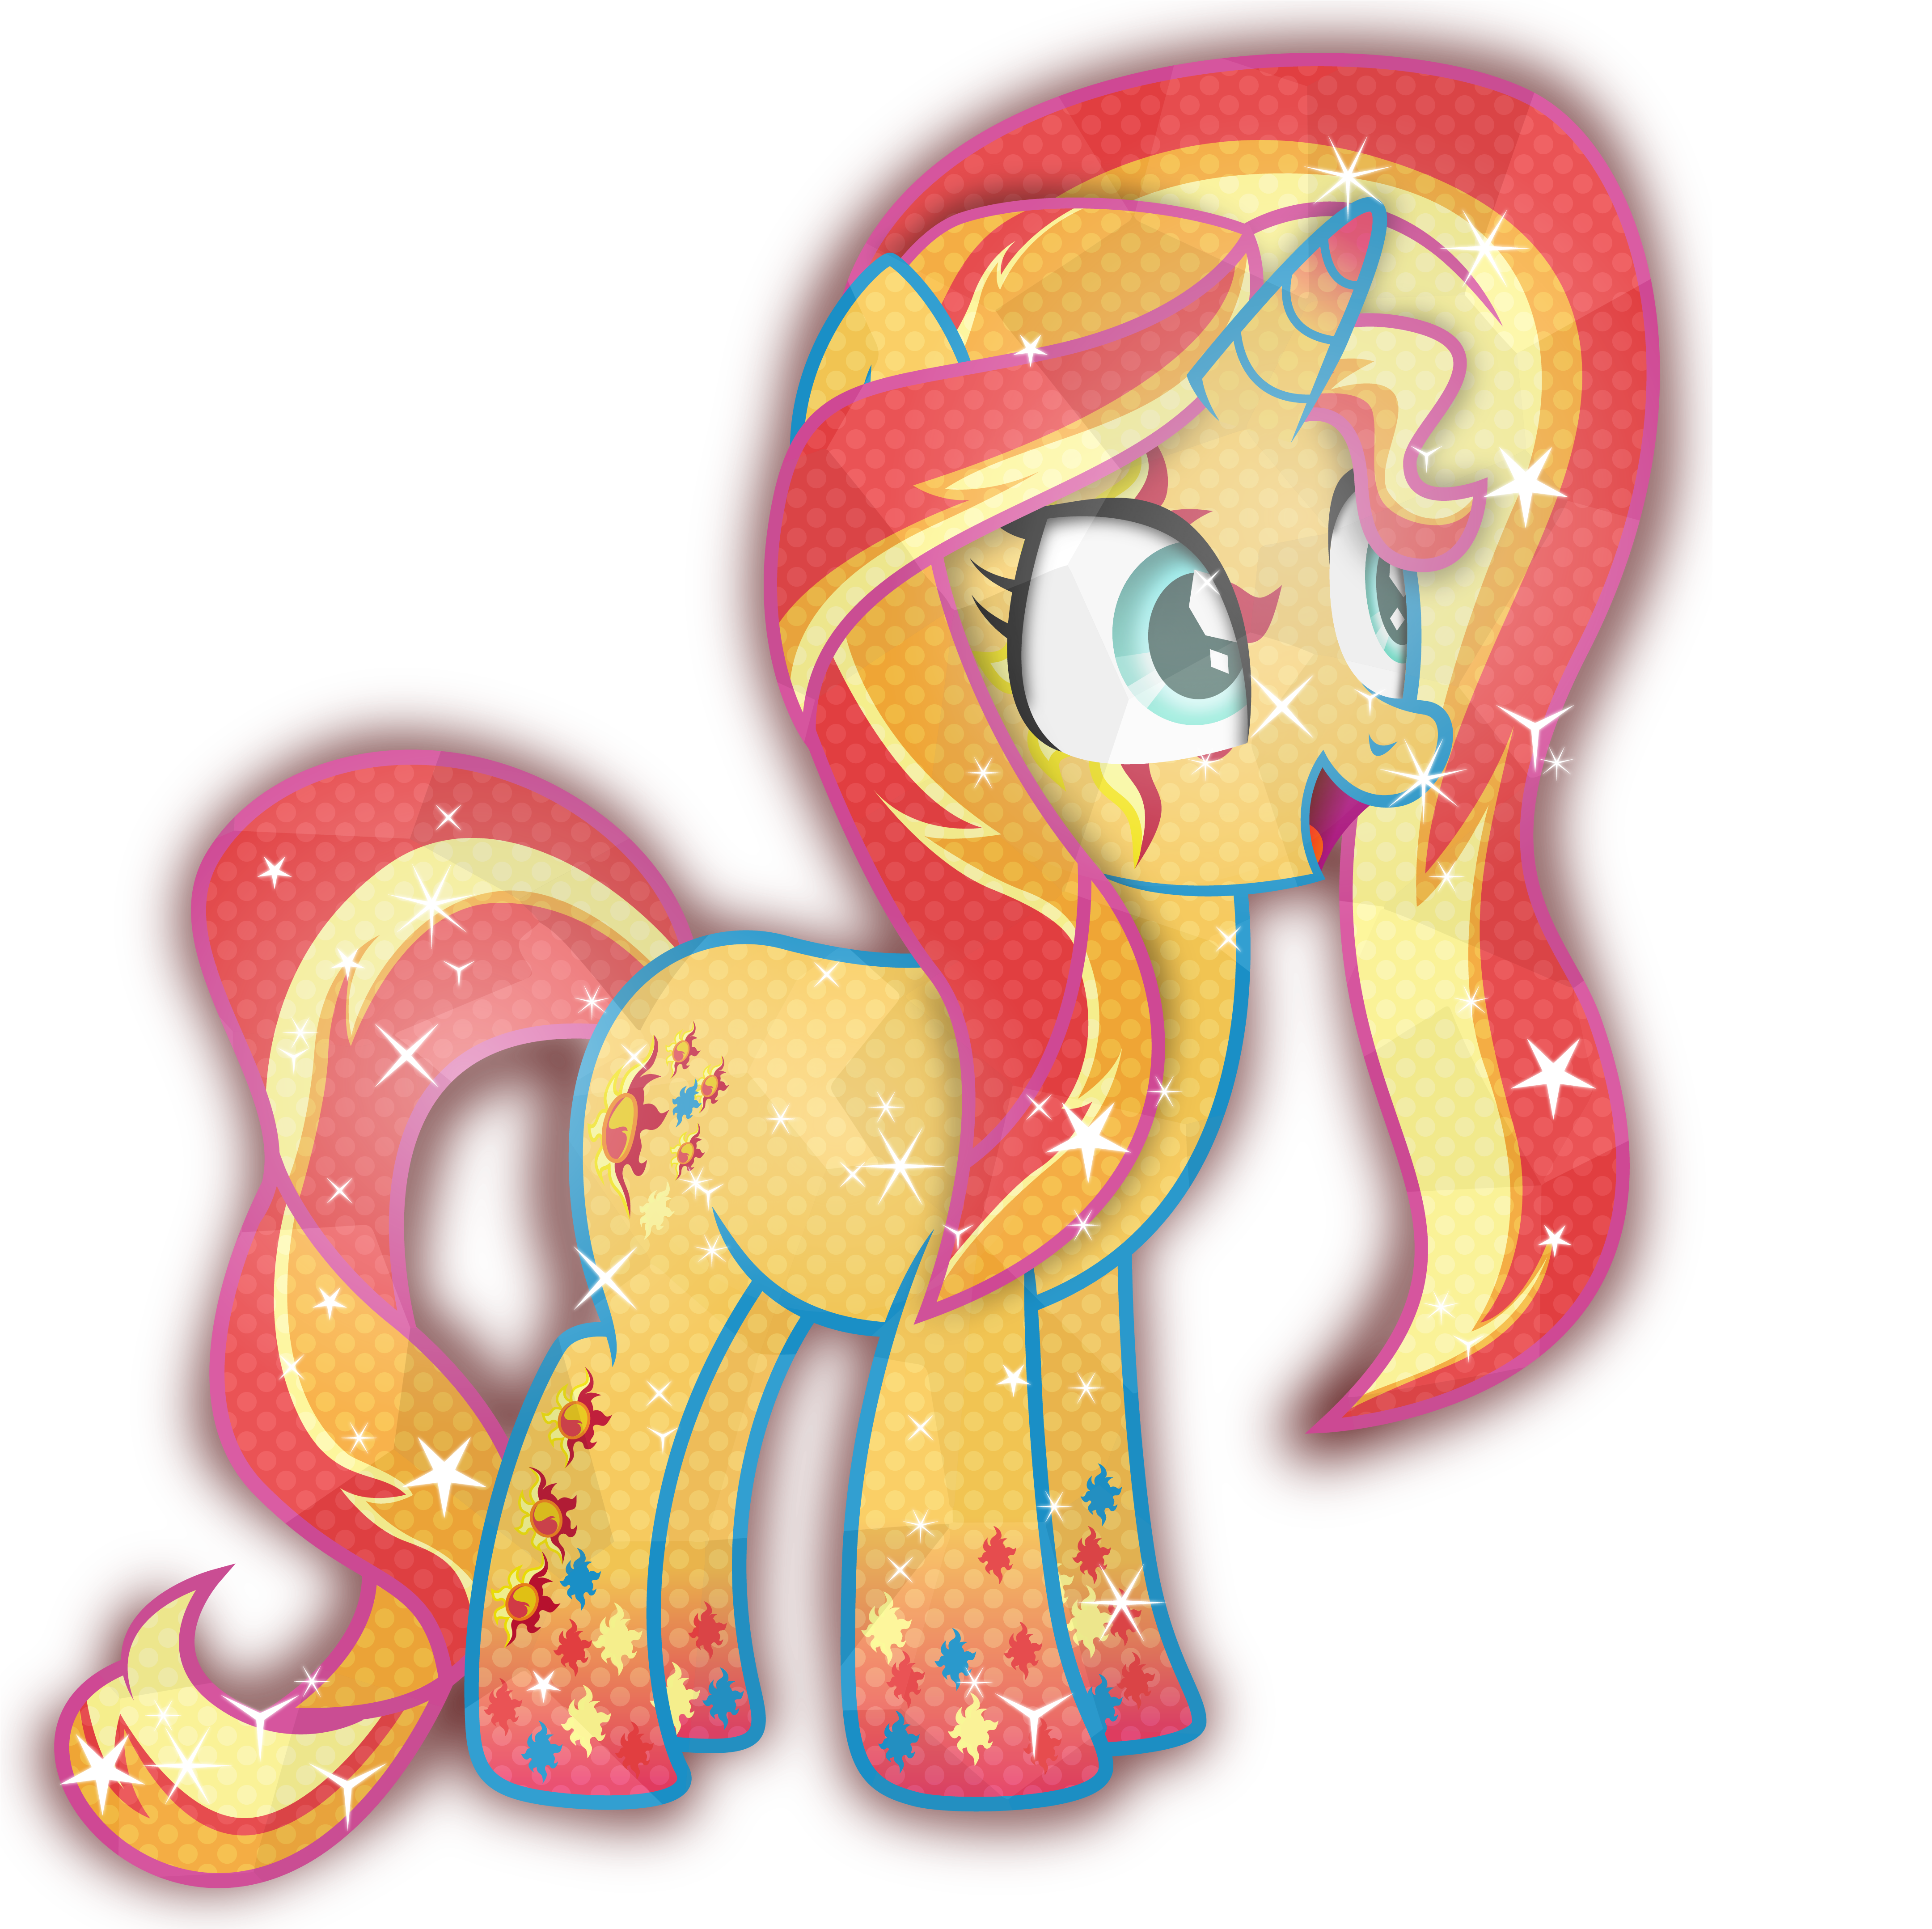 Free My Little Pony Sunset Shimmer Cutie Mark - Mlp Cutie Mark Magic Sunset Shimmer (4415x5287)